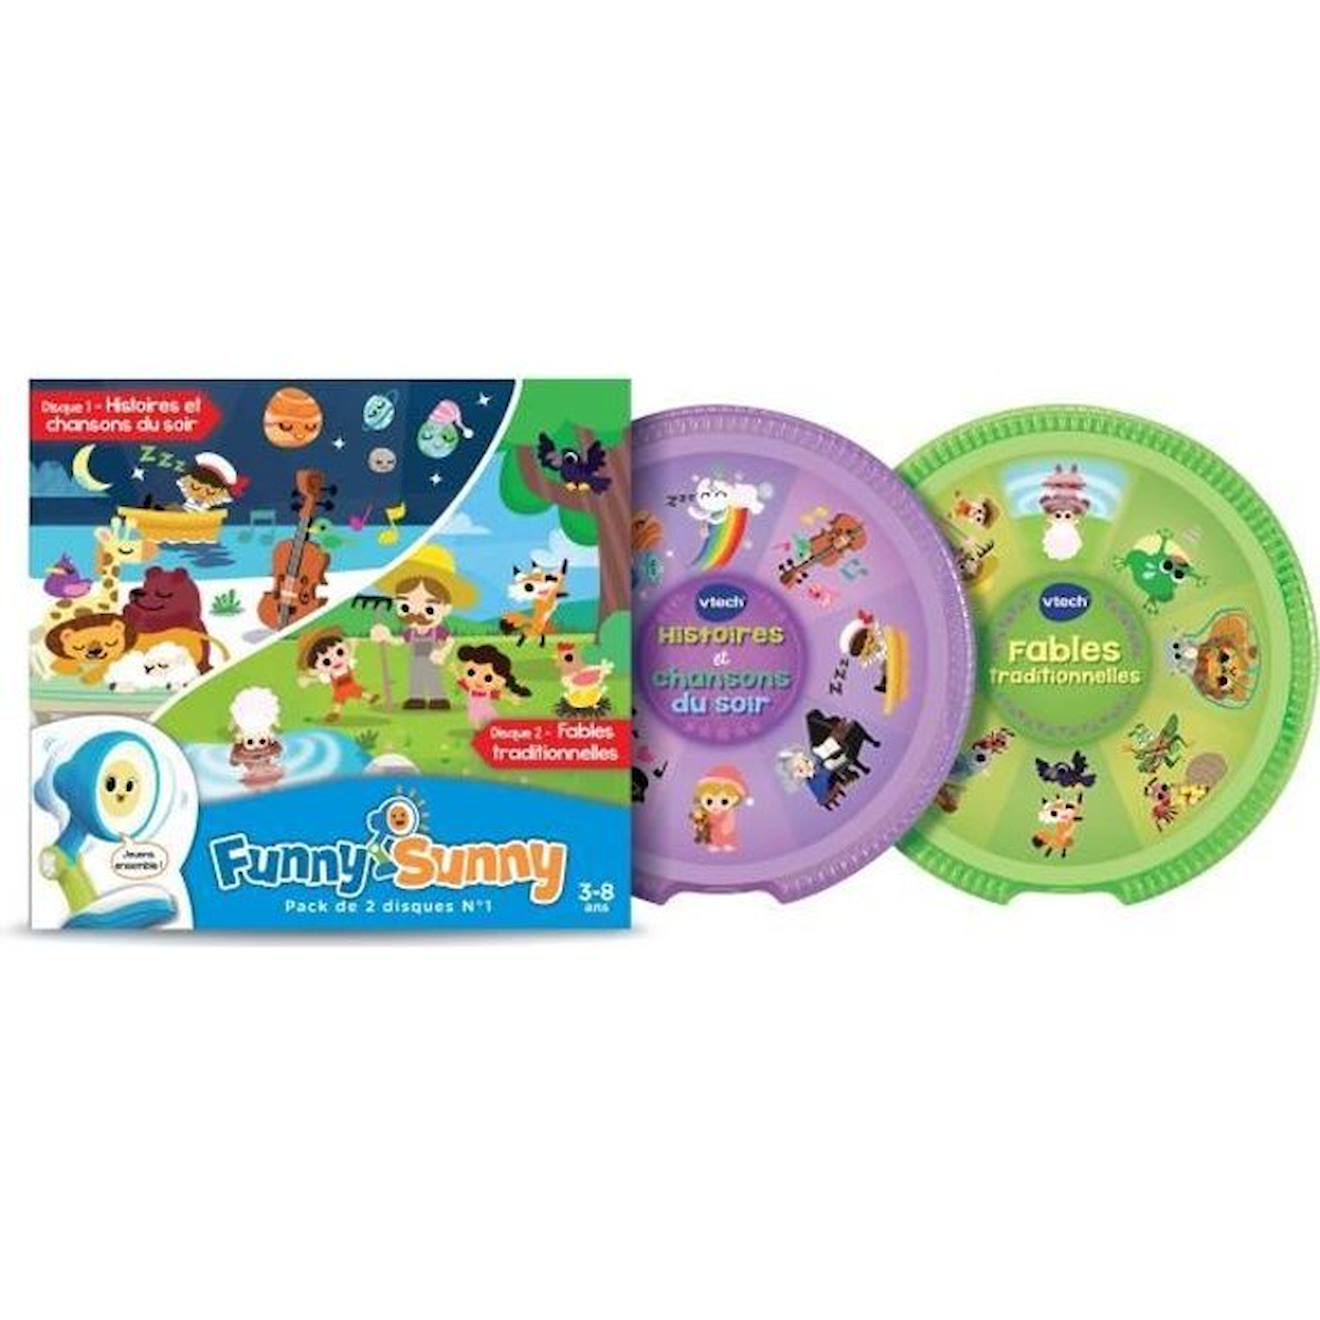 Vtech Funny Sunny - Pack 2 Disques N°1 Vert